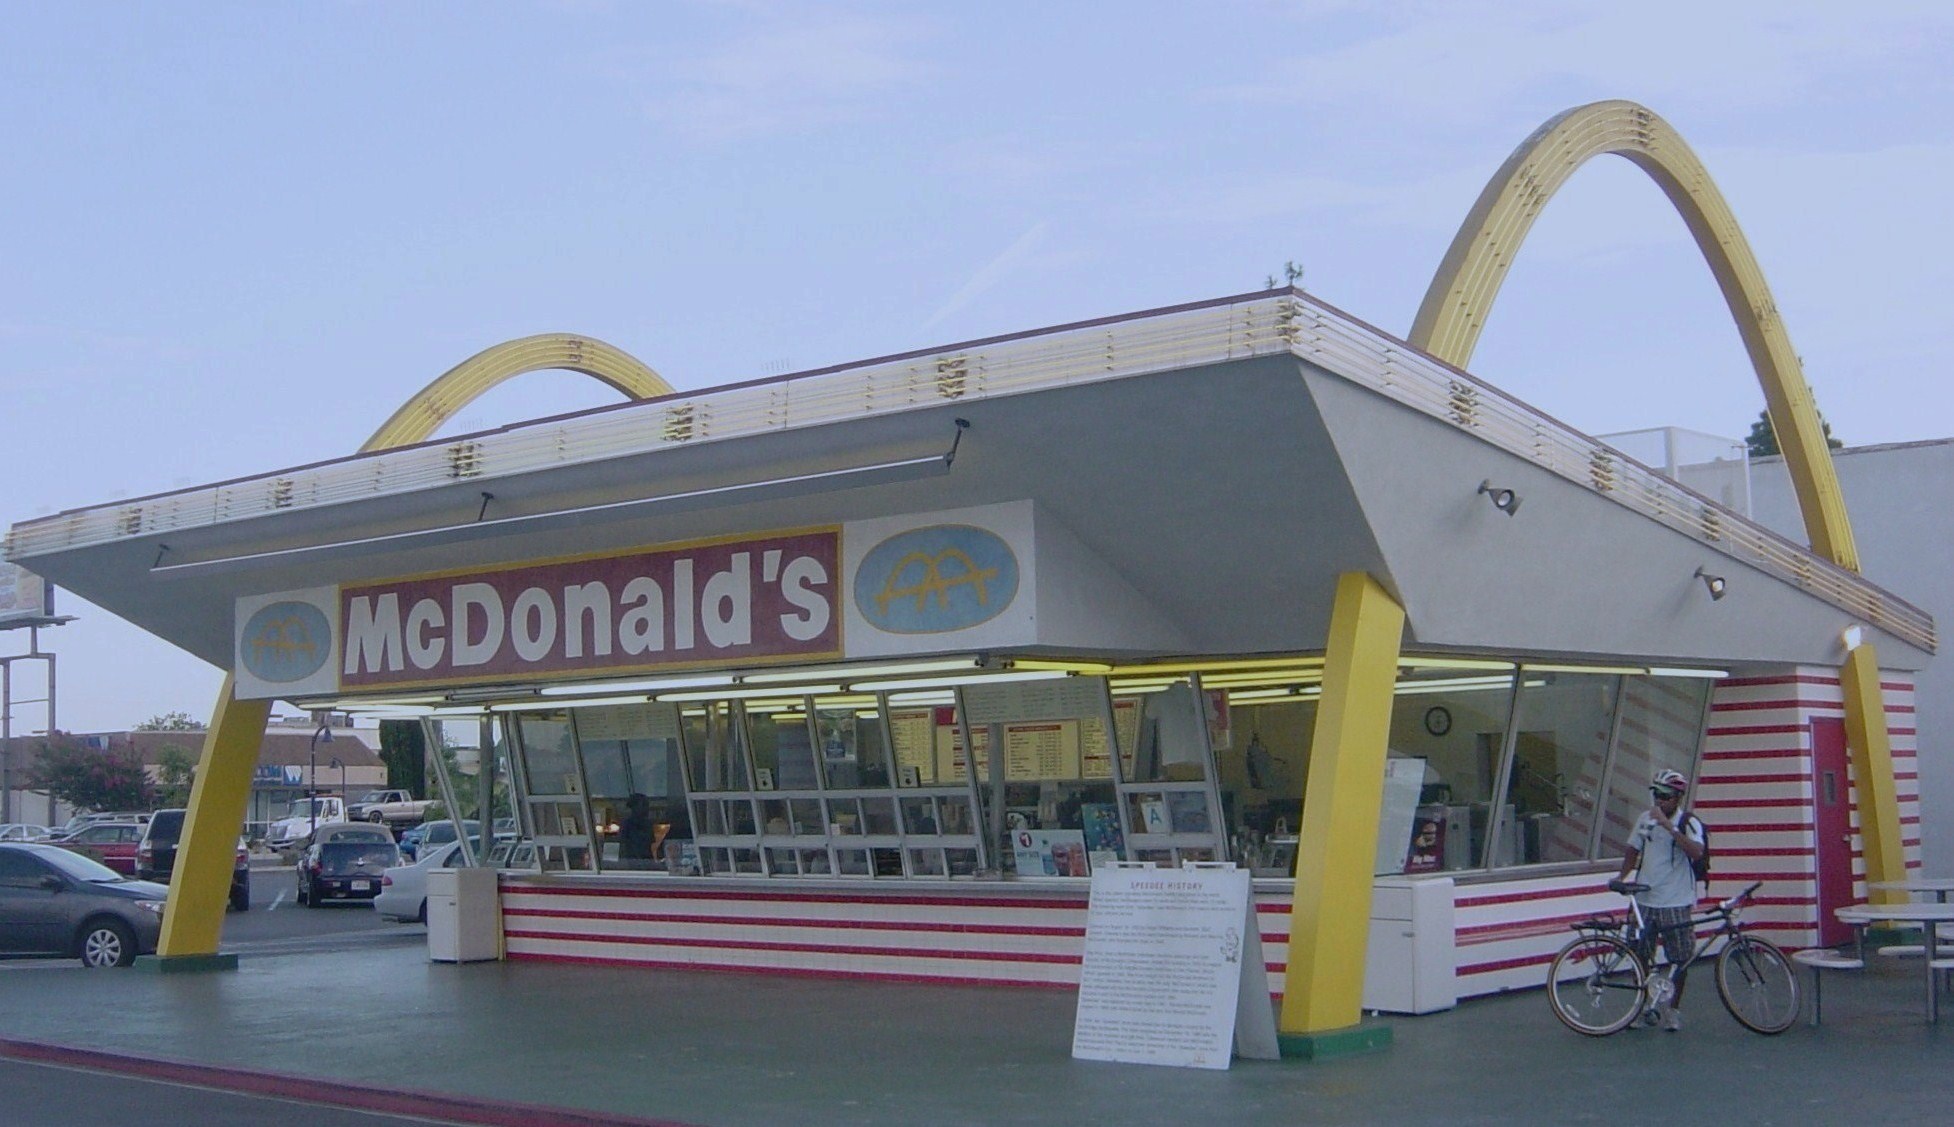 Oldest McDonald's in operation, Downey, California, photo by Ruth Hara